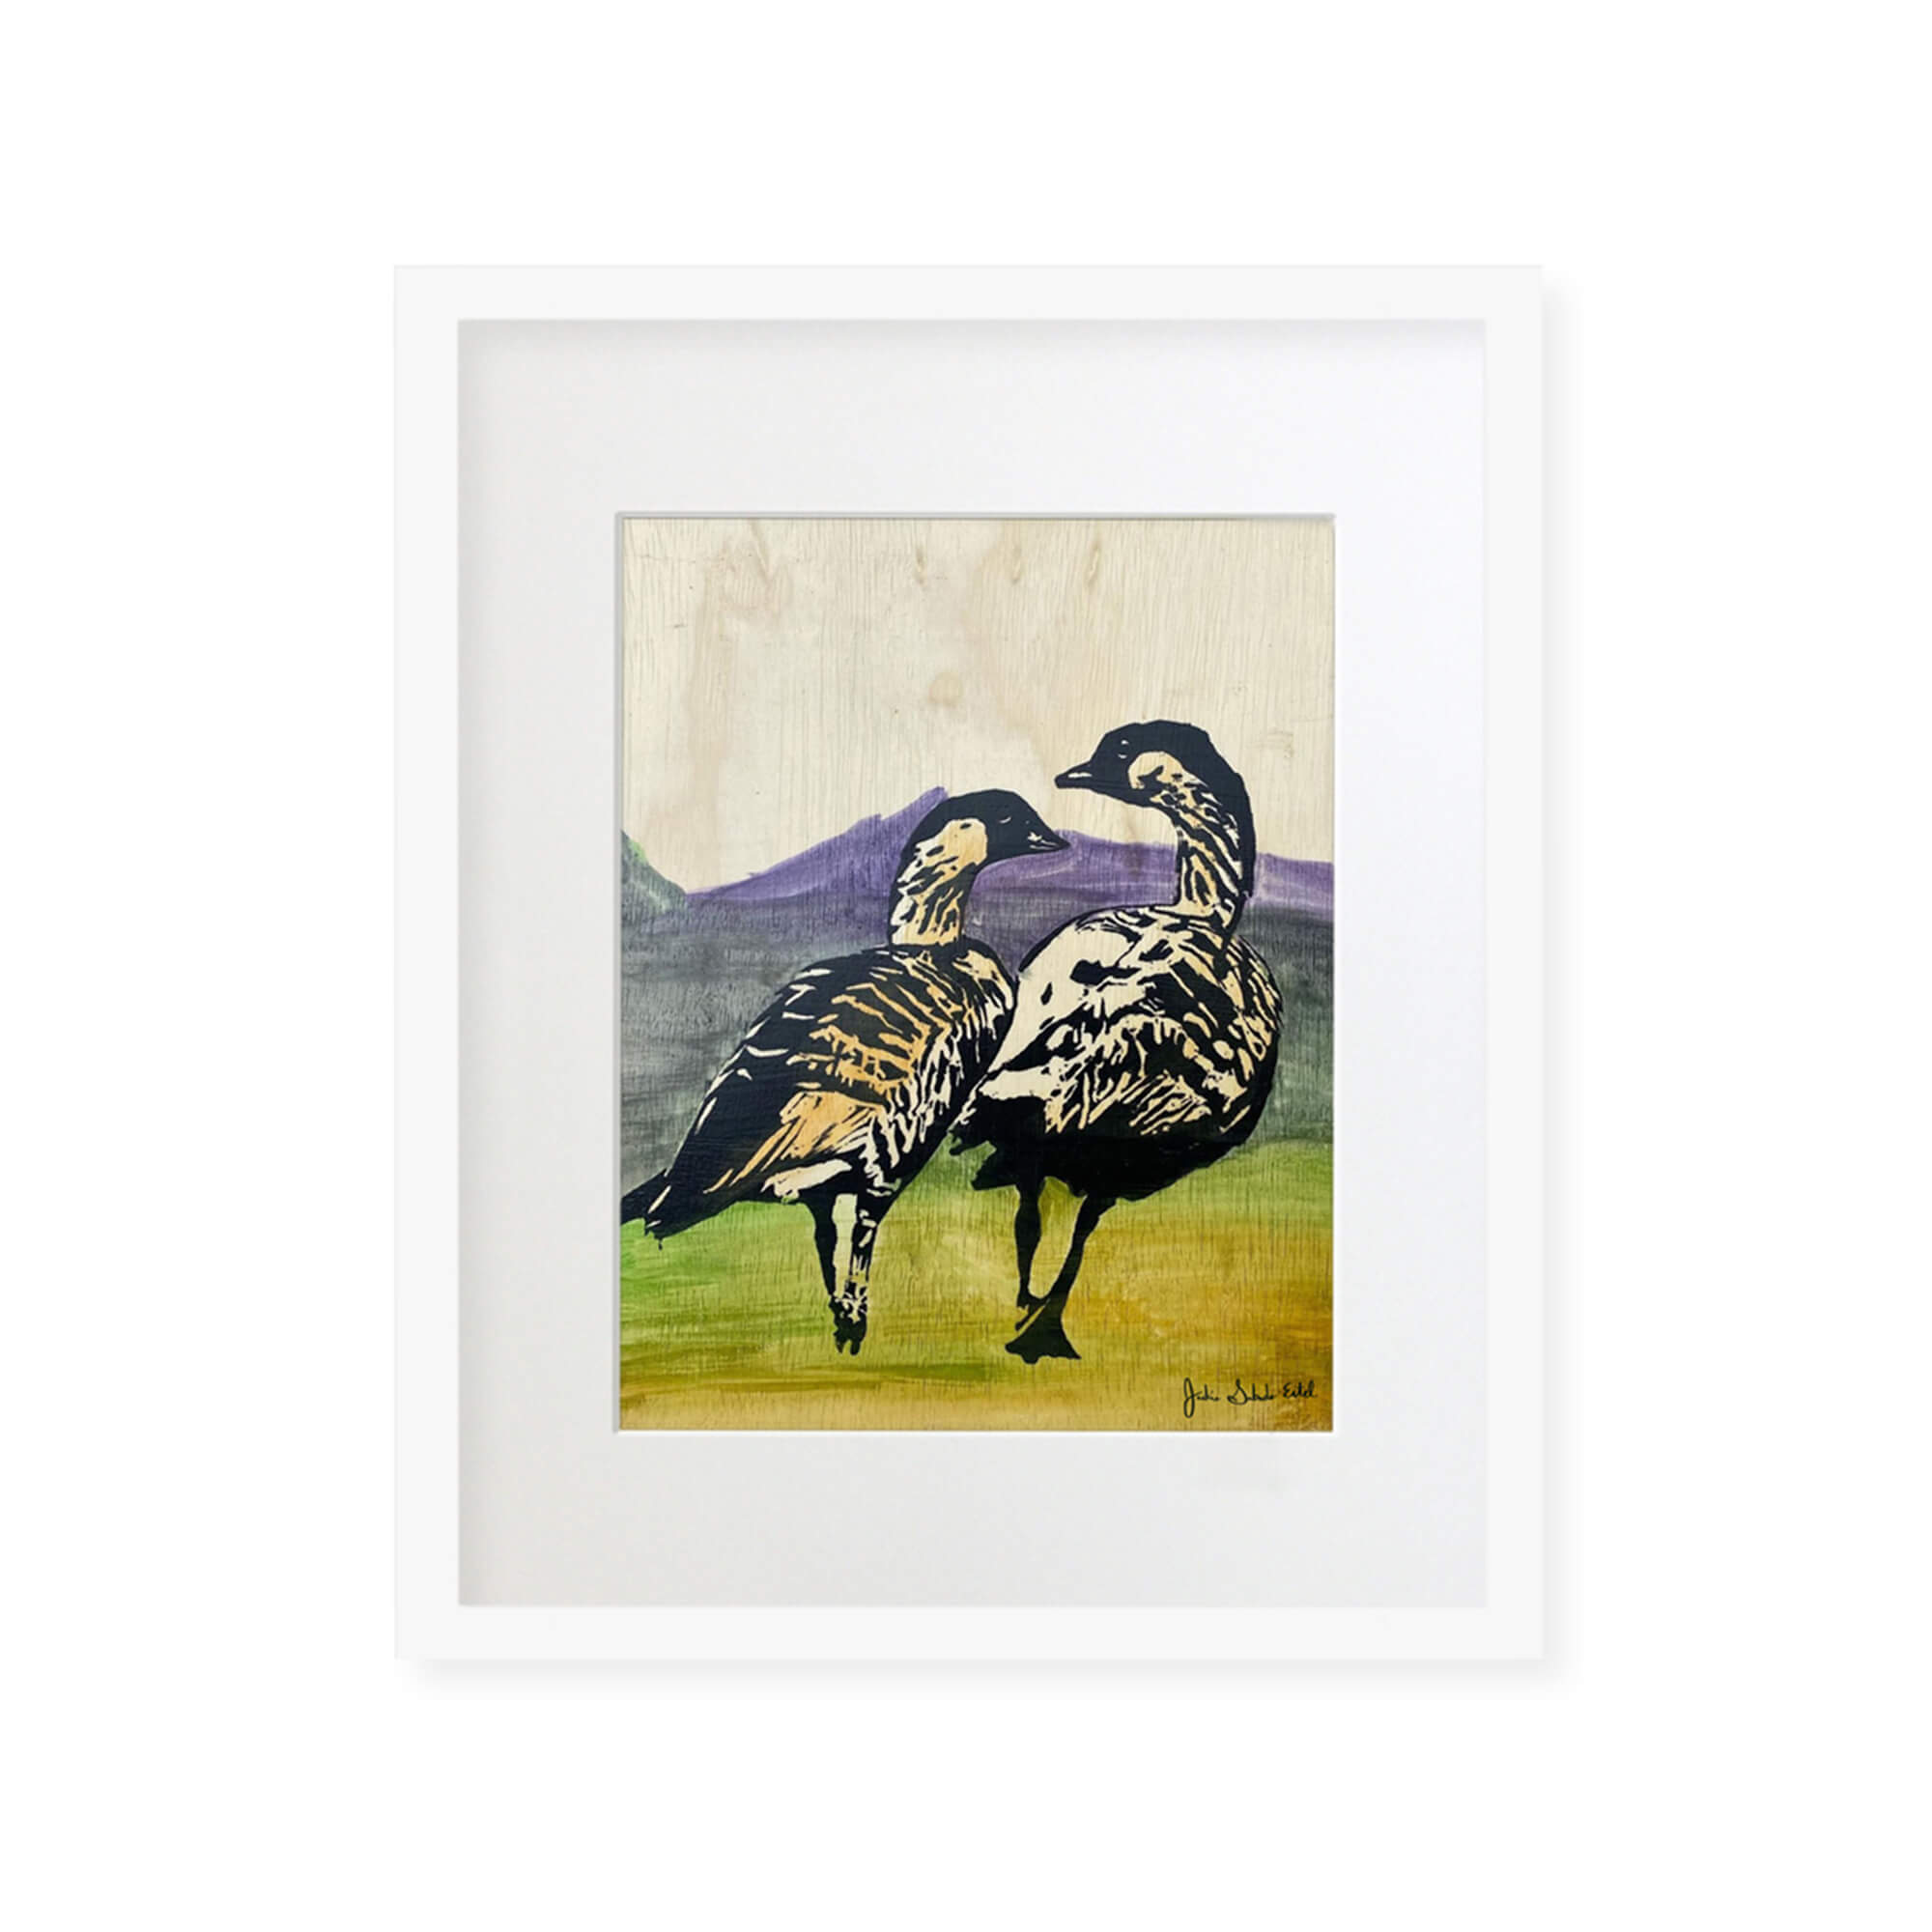 A framed matted art print featuring two ducks walking while enjoying the colorful landscapes of Hawaii by Hawaii artist Jackie Eitel